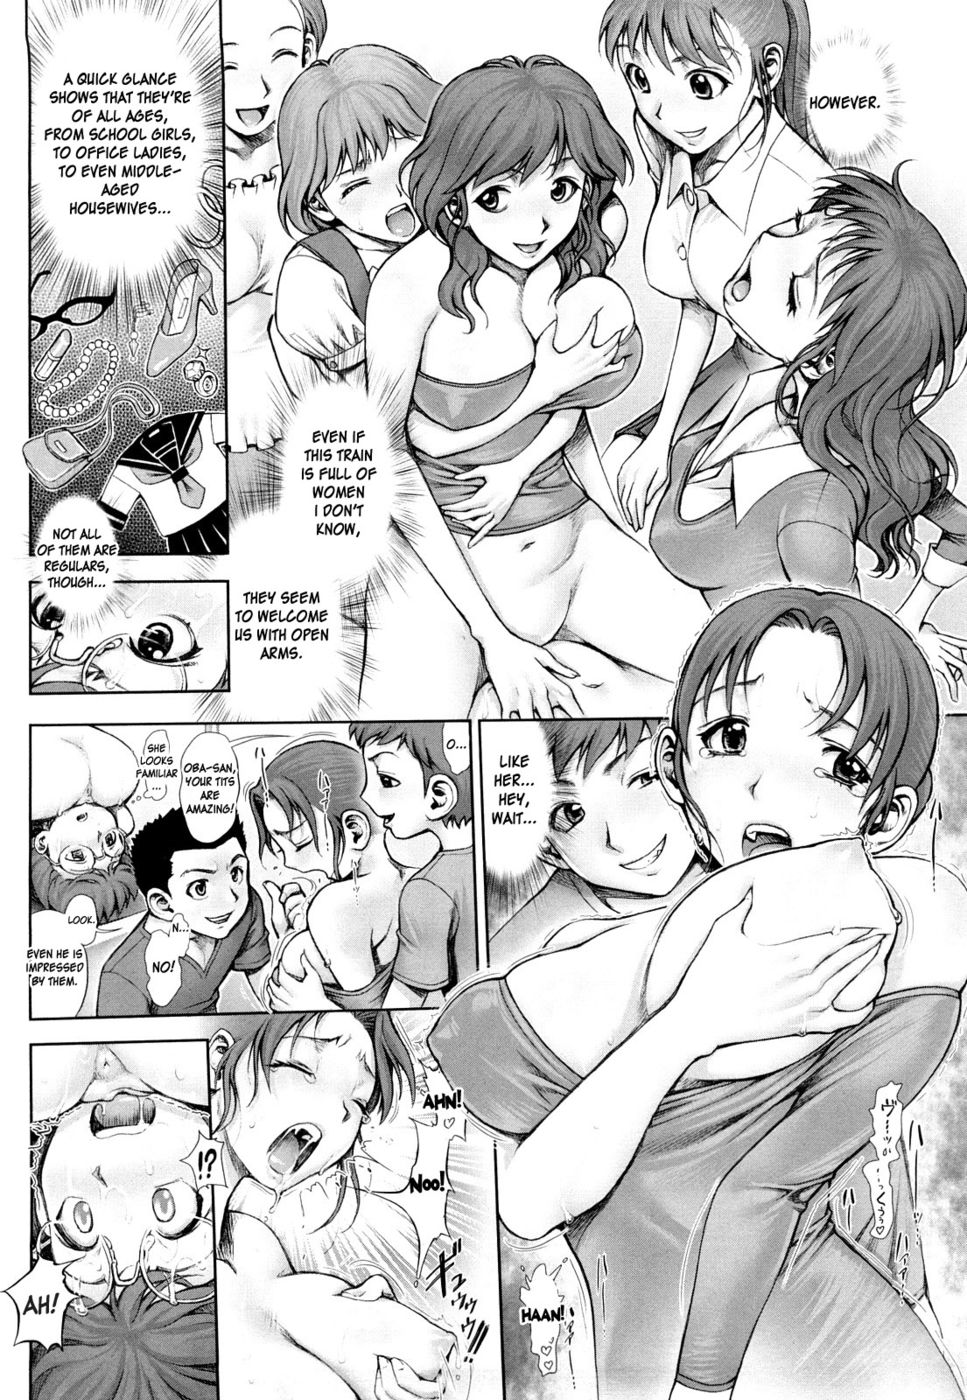 2xxx Vf Vedeo - Rush Hour XXX-Chapter 2 -Xxx all night long in a rush hour train-Hentai  Manga Hentai Comic - Page: 18 - Online porn video at mobile